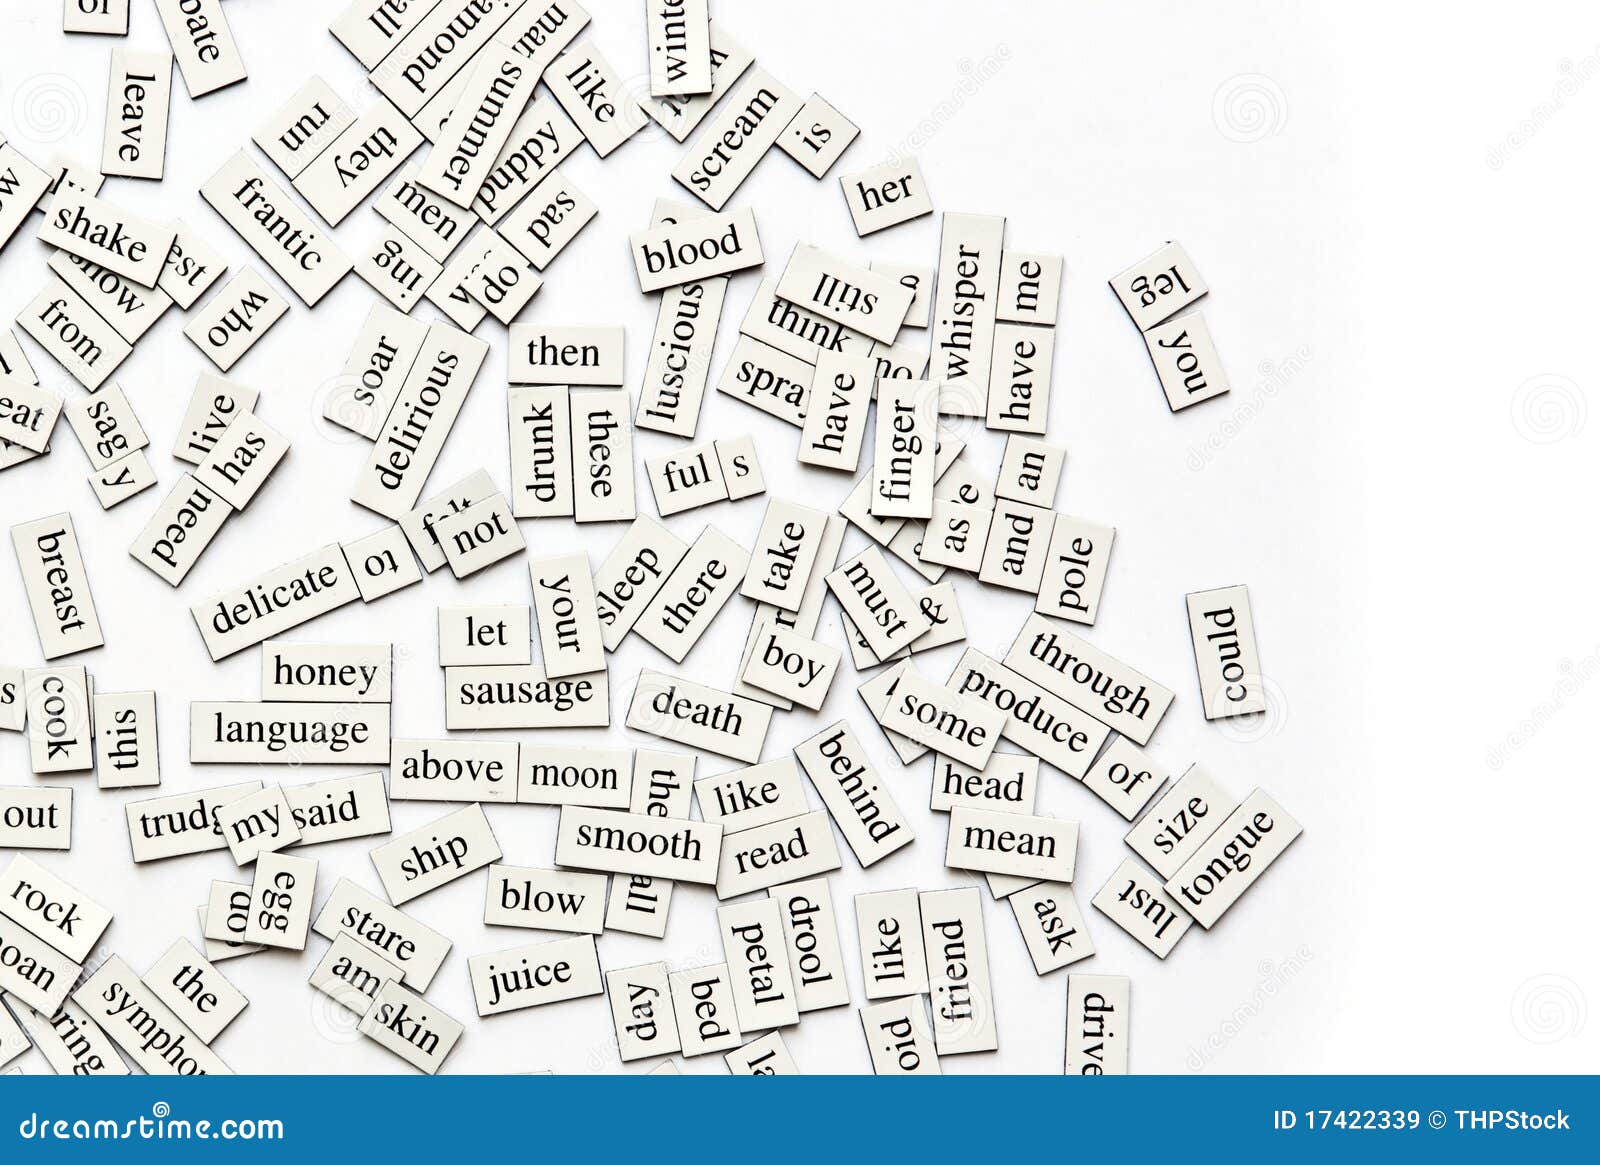 magnetic poetry words english grammar